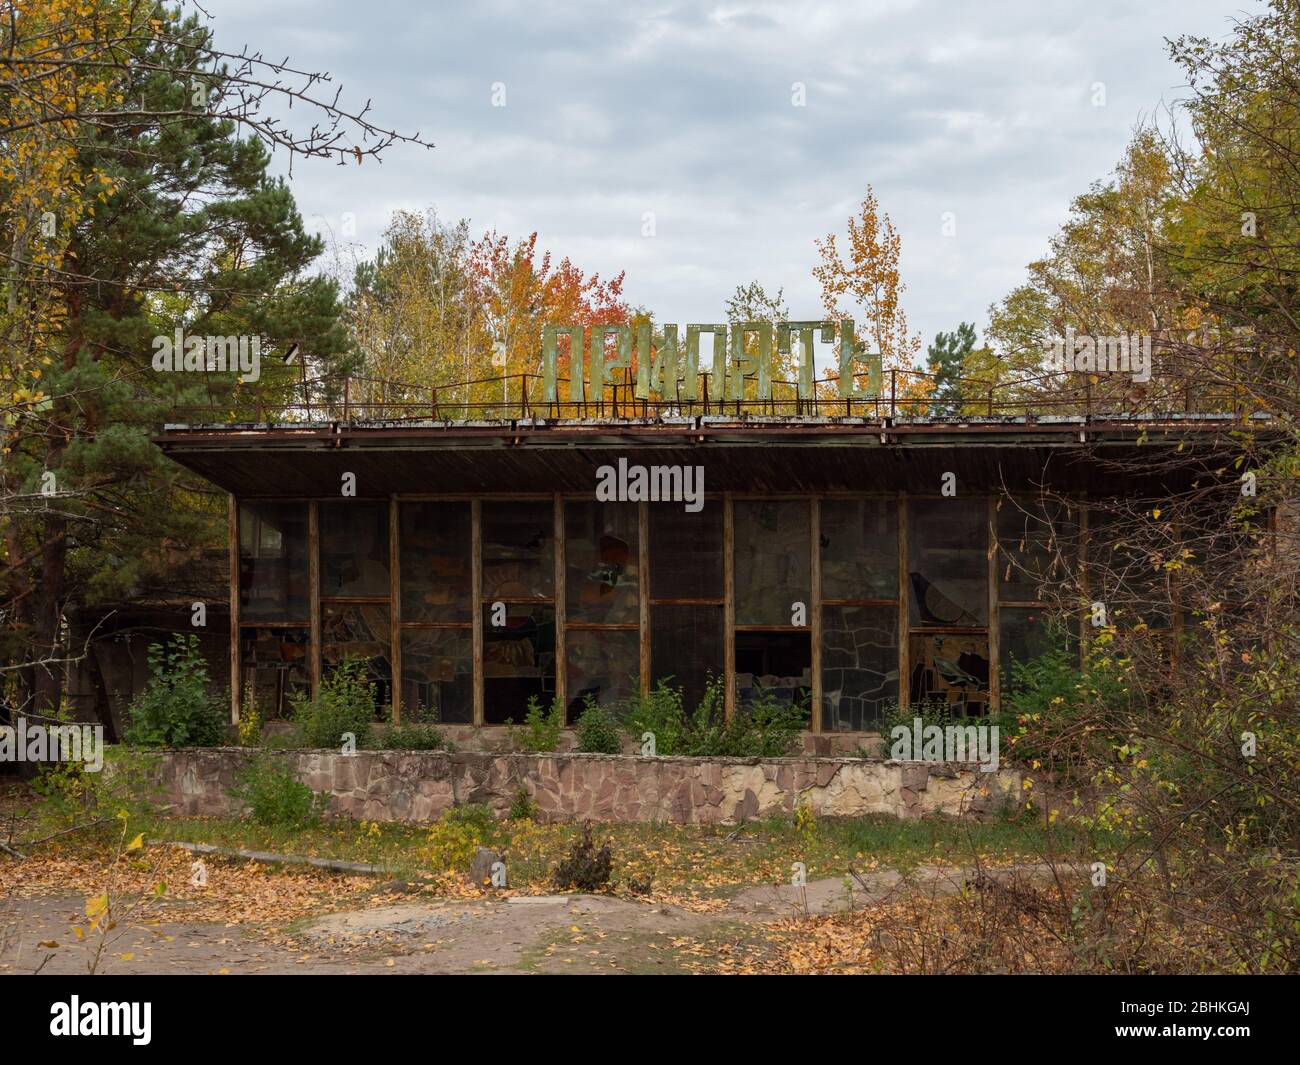 Cafe in abandoned ghost town Pripyat, post apocalyptic city, autumn season in Chernobyl exclusion zone, Ukraine. Inscription in russian: "cafe Pripyat Stock Photo